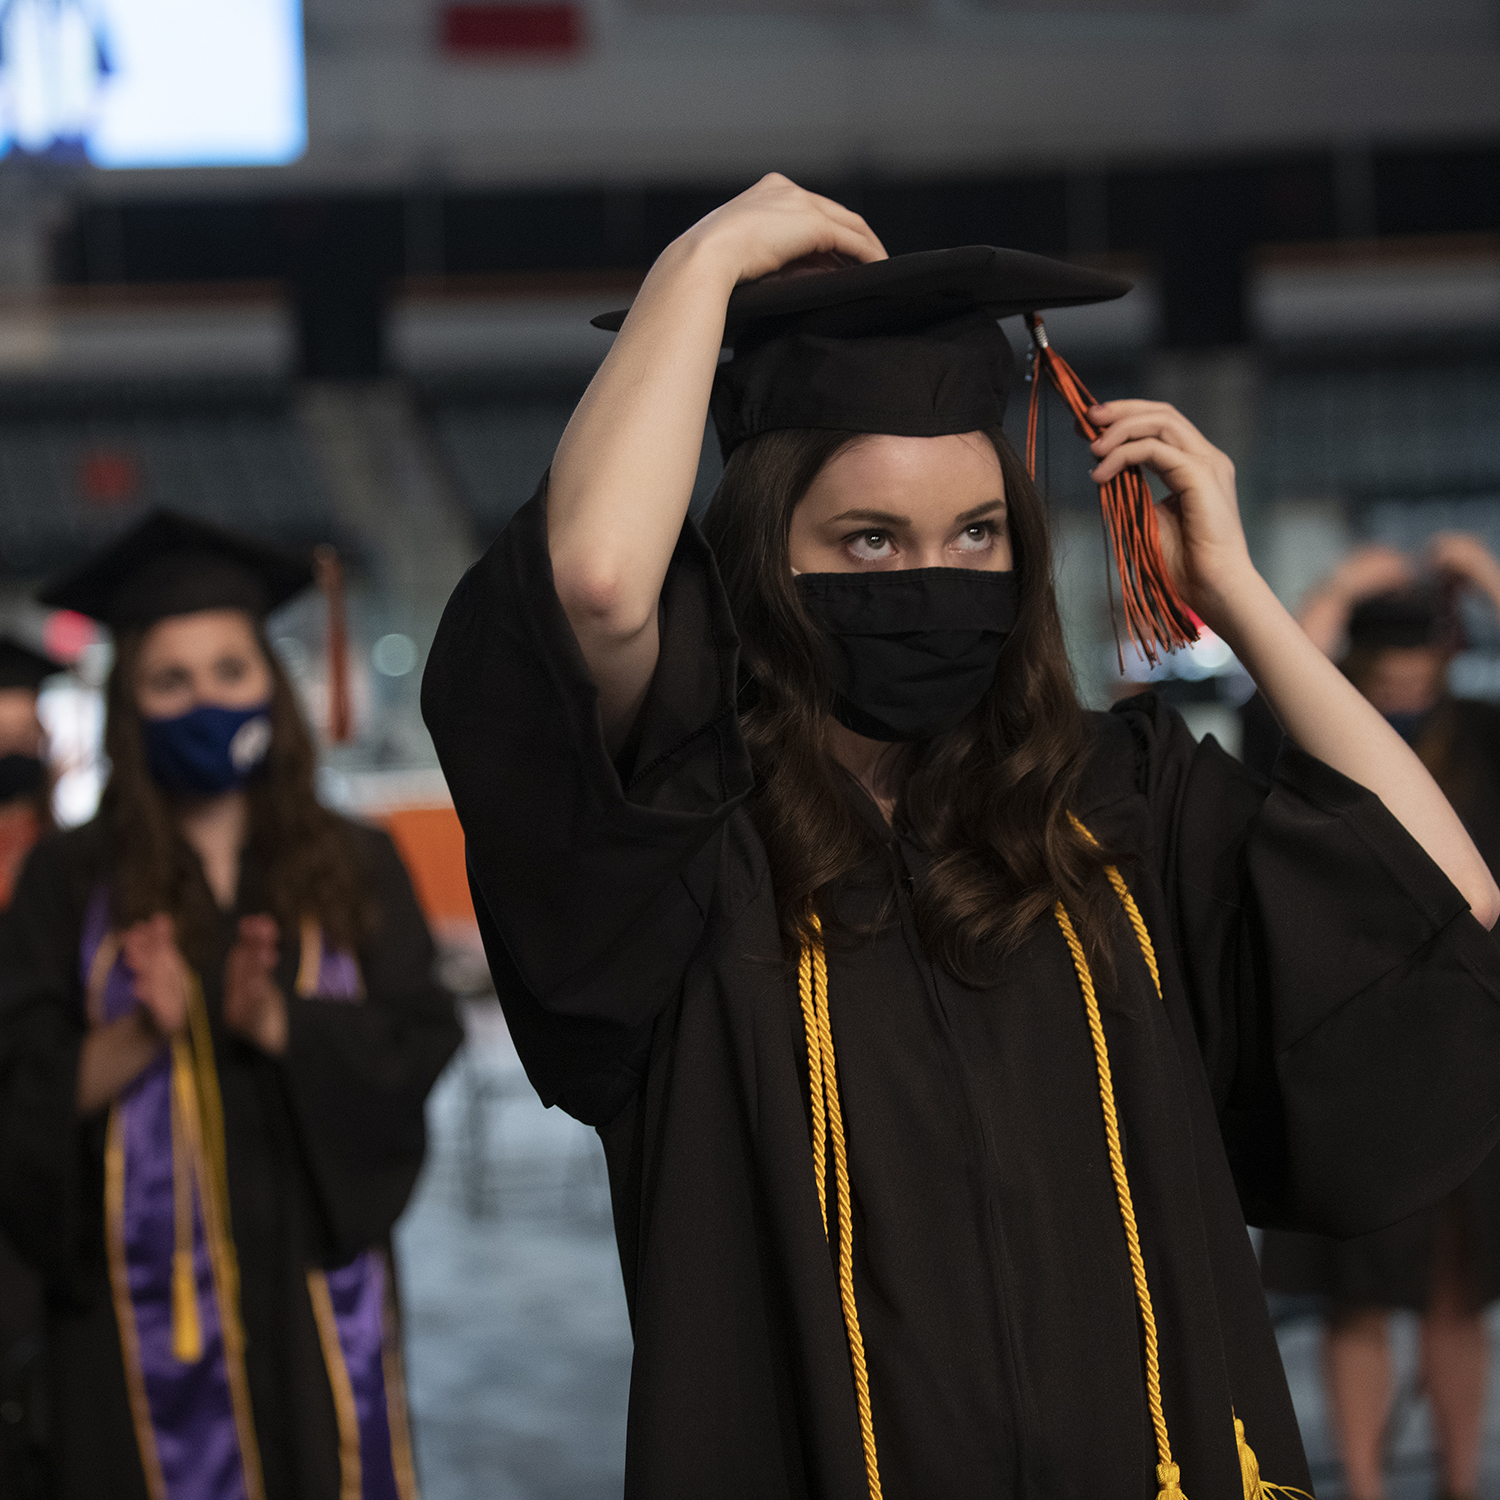 A student donning regalia at a commencement ceremony.